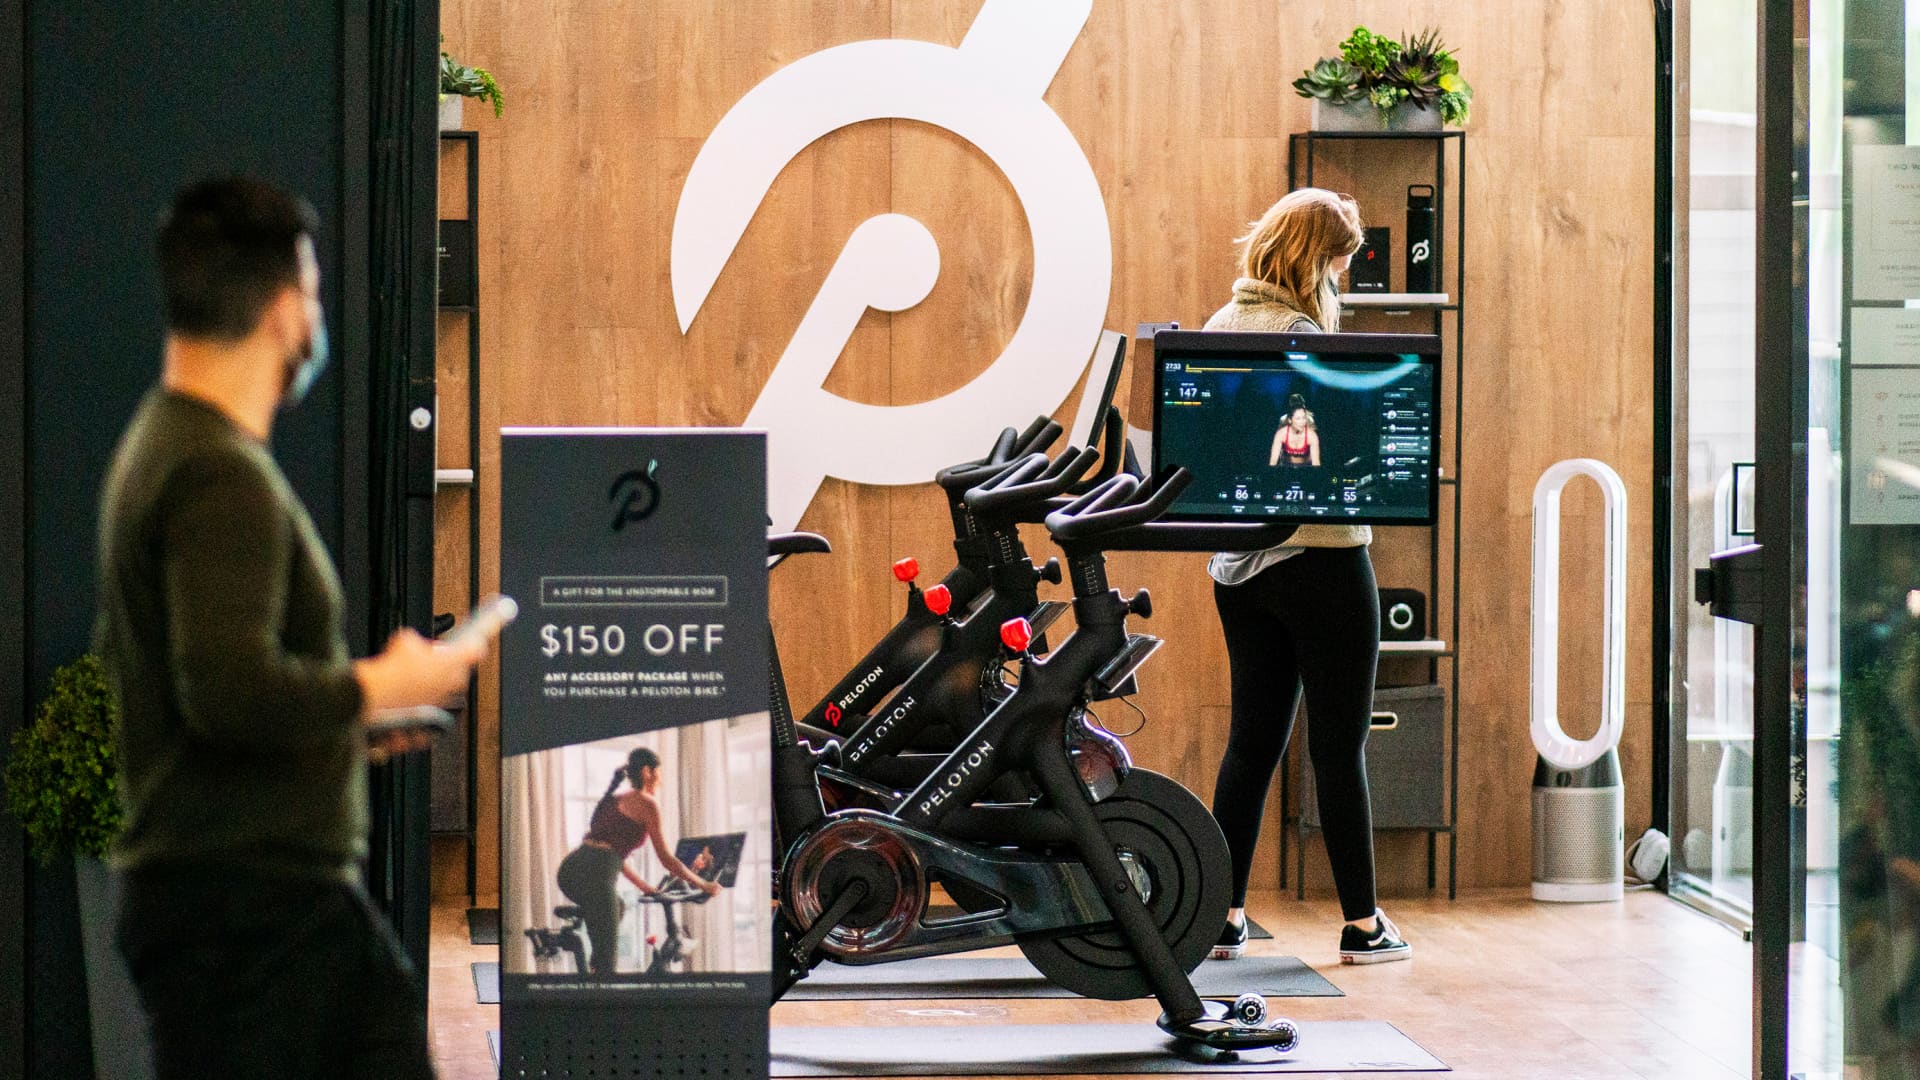 Peloton, Bed Bath & Beyond, Nordstrom and more